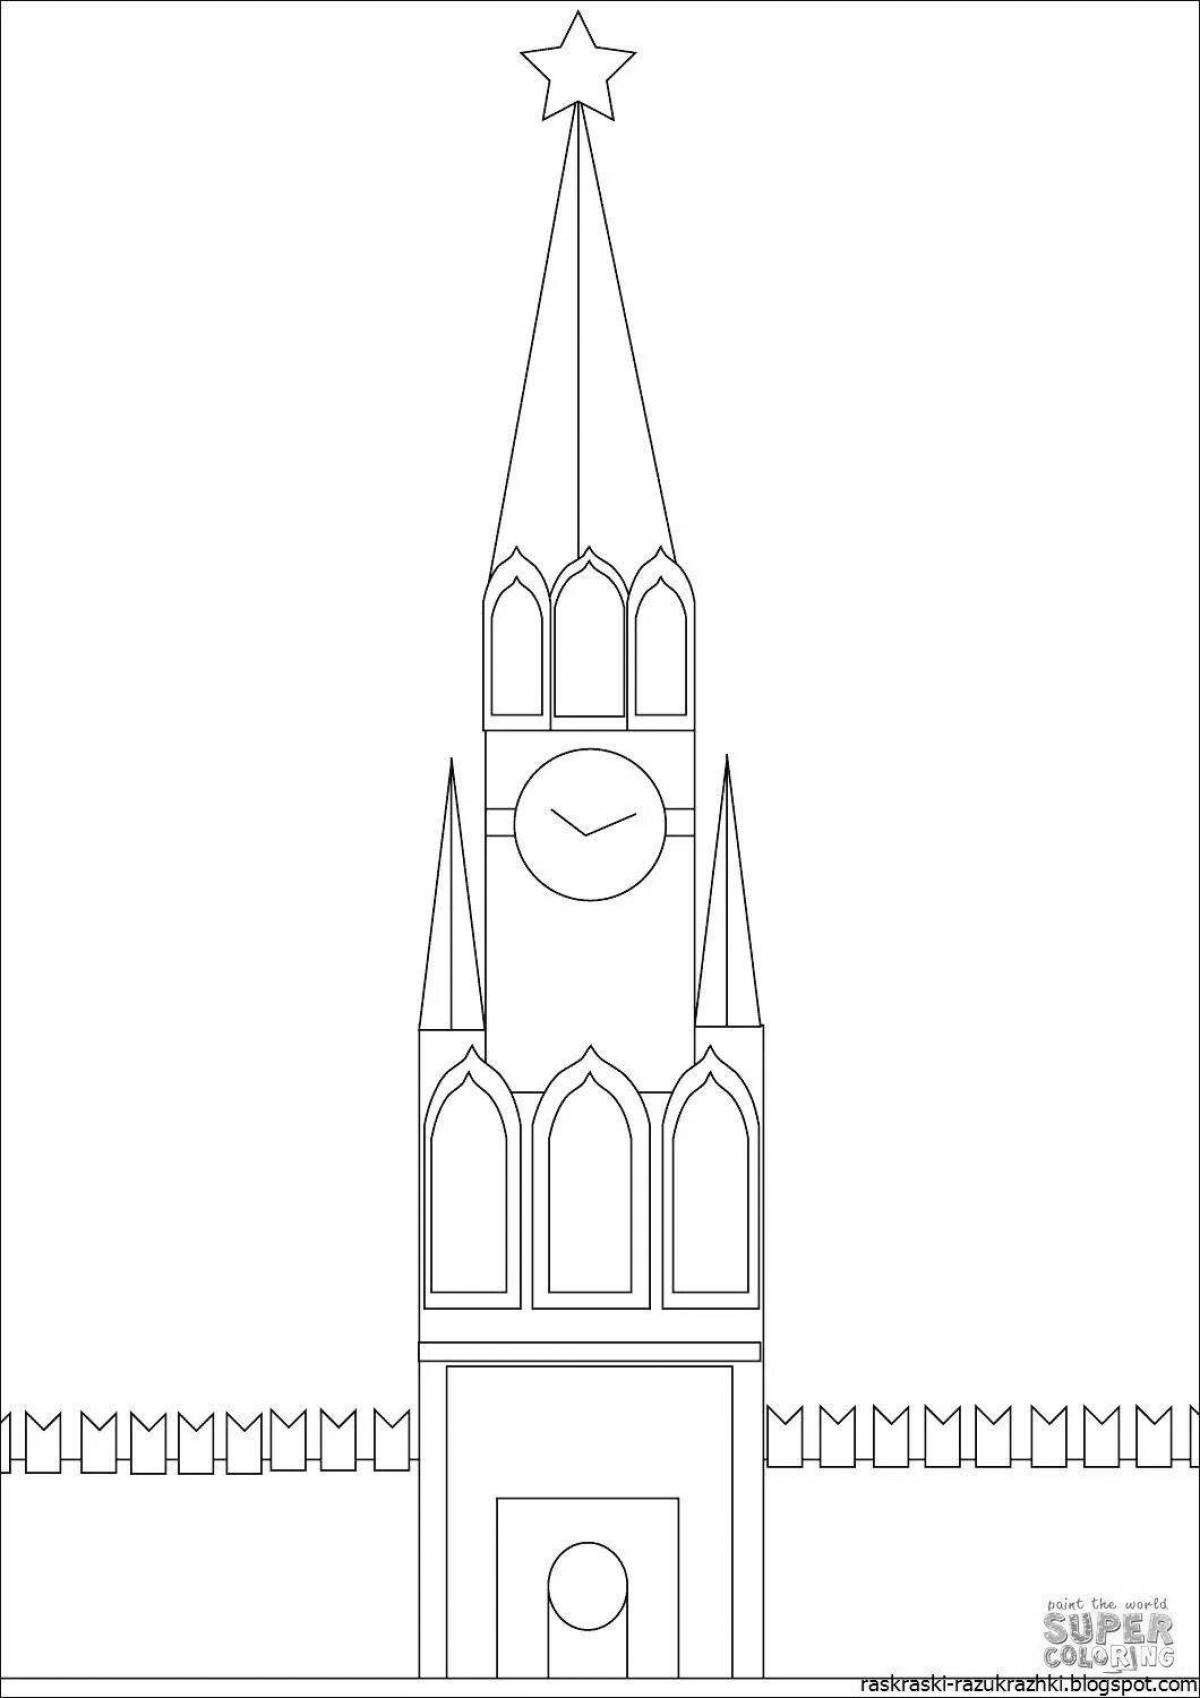 Great Moscow coloring book for kids